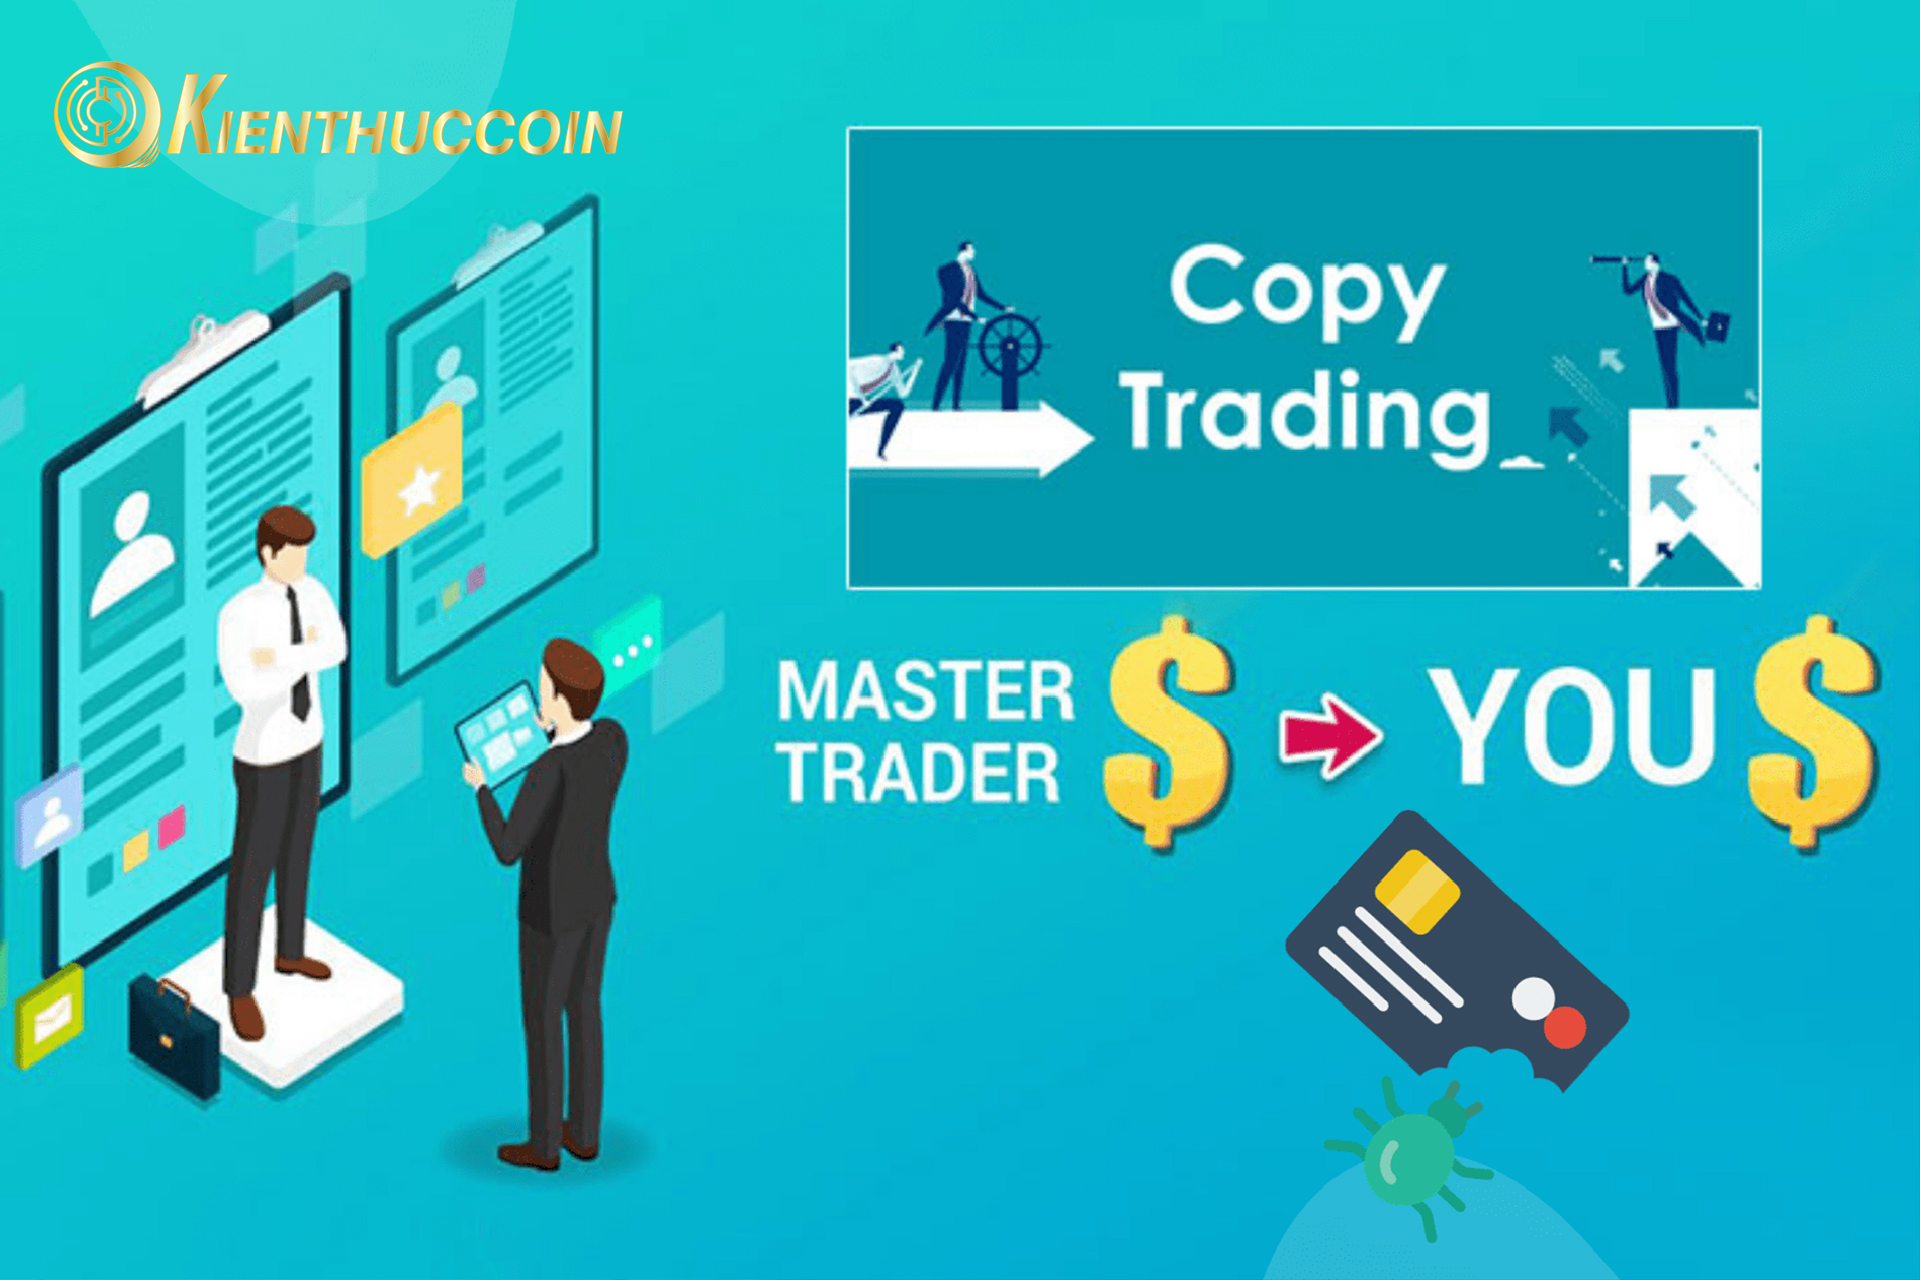 What is copy trade? Assess opportunities and risks when using